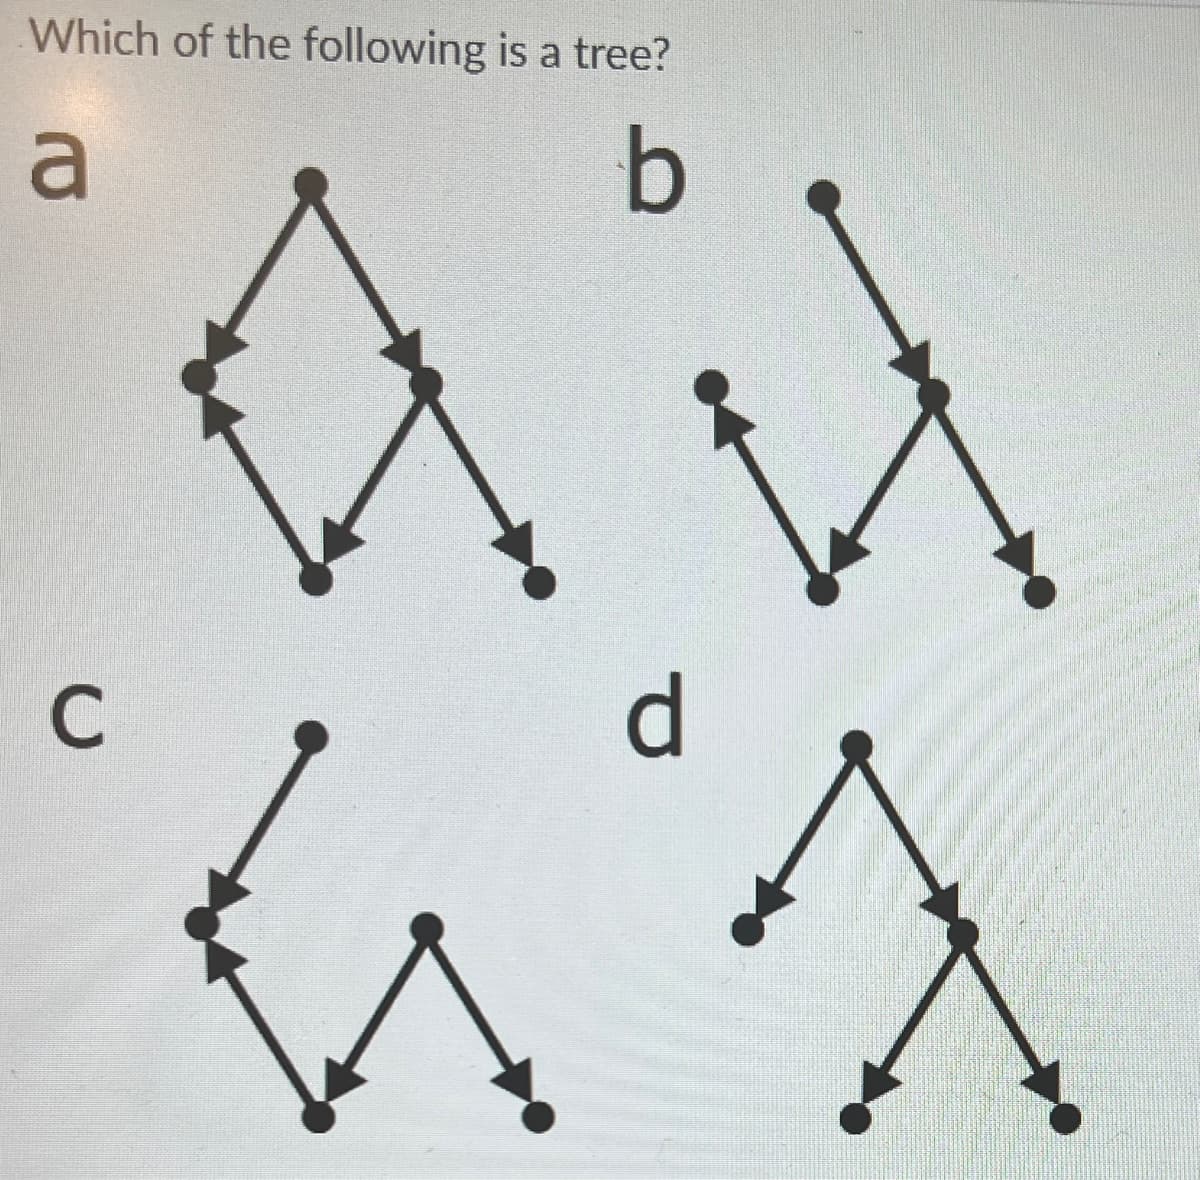 Which of the following is a tree?
a
b
it
d
C